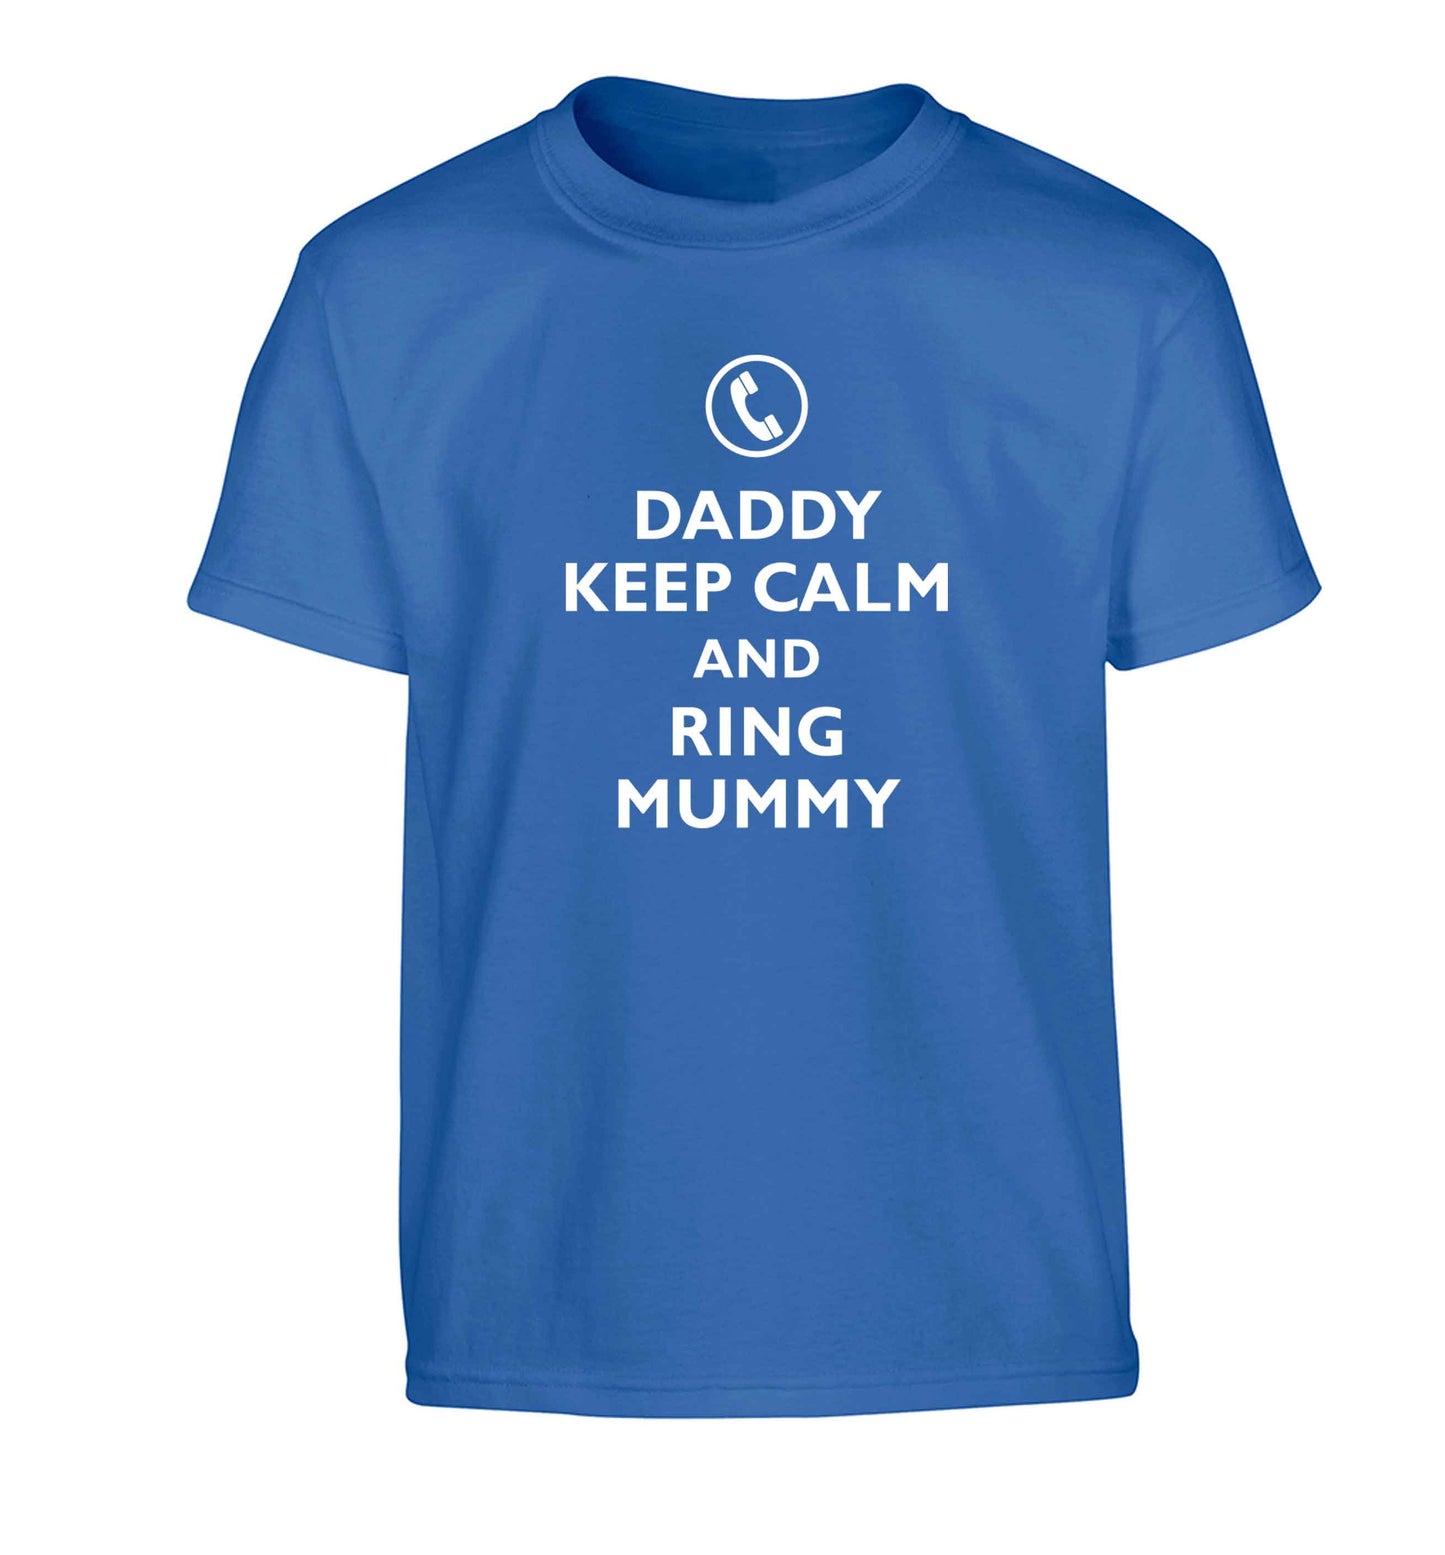 Daddy keep calm and ring mummy Children's blue Tshirt 12-13 Years